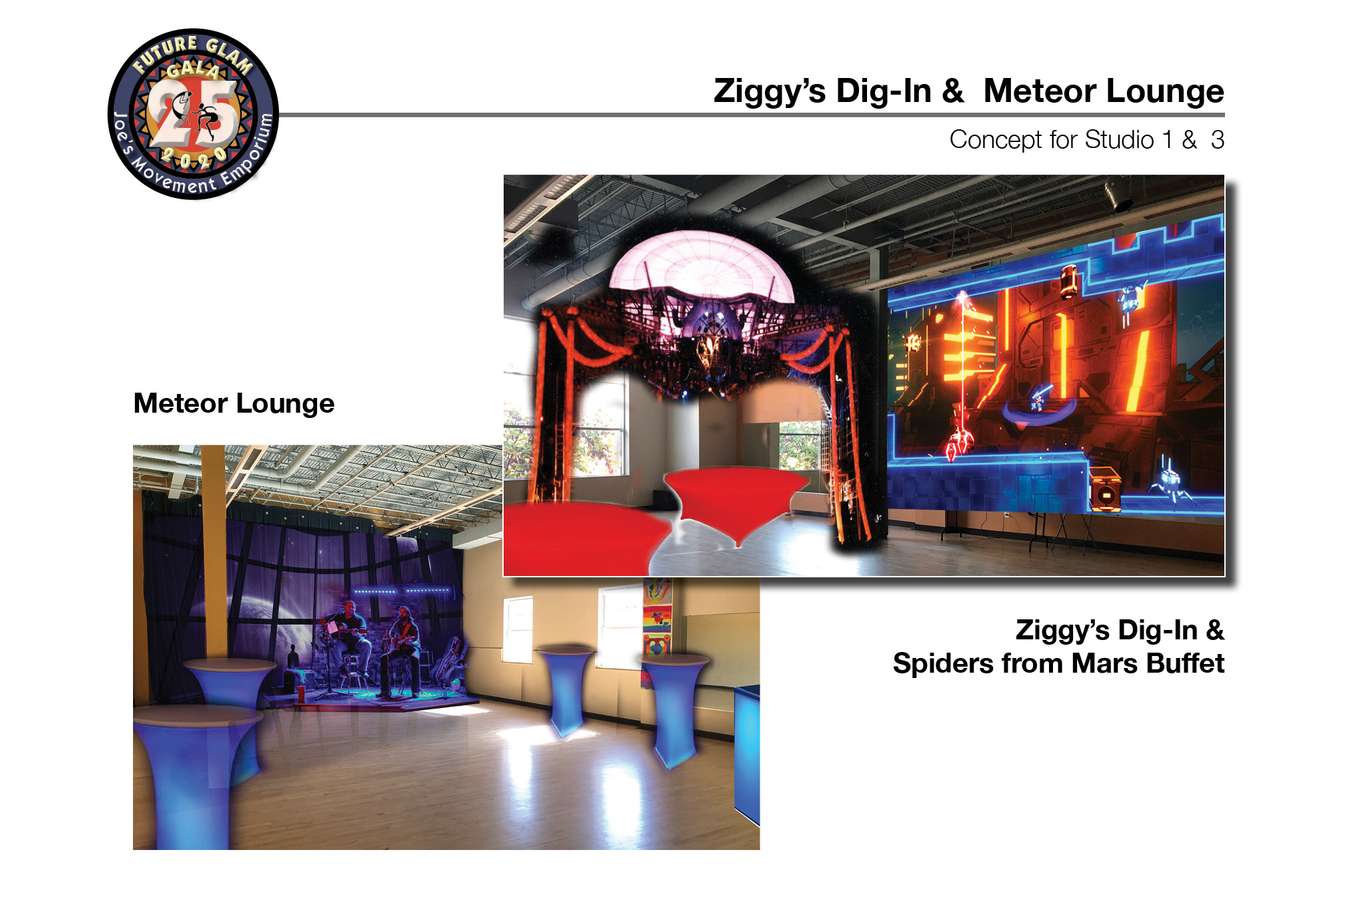 2H Glam rooms : Ziggy's Stardust Lounge served Space Cowboy Caviar, Tribble Nibbles, Saturn Rings, under a giant Spider from Mars. In the Meteor Lounge, drinks were poured opposite the band, and arial performers floated around the ceiling. 